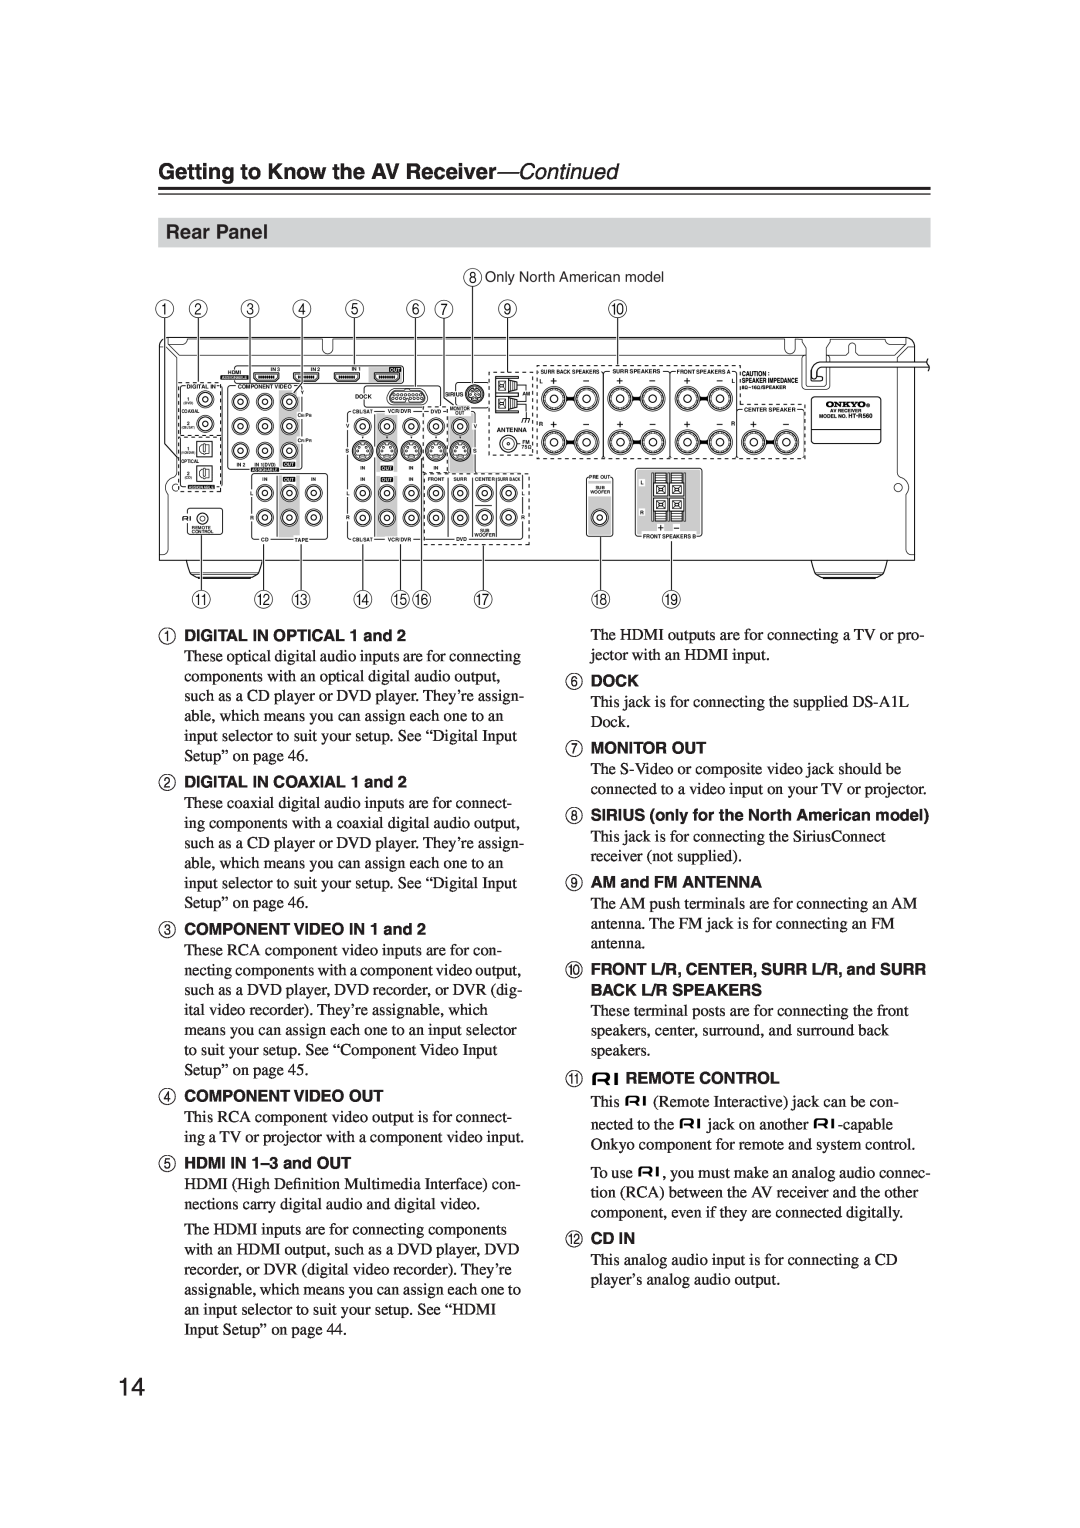 Onkyo S5100 instruction manual Rear Panel, Getting to Know the AV Receiver—Continued, K L M N Op Q 